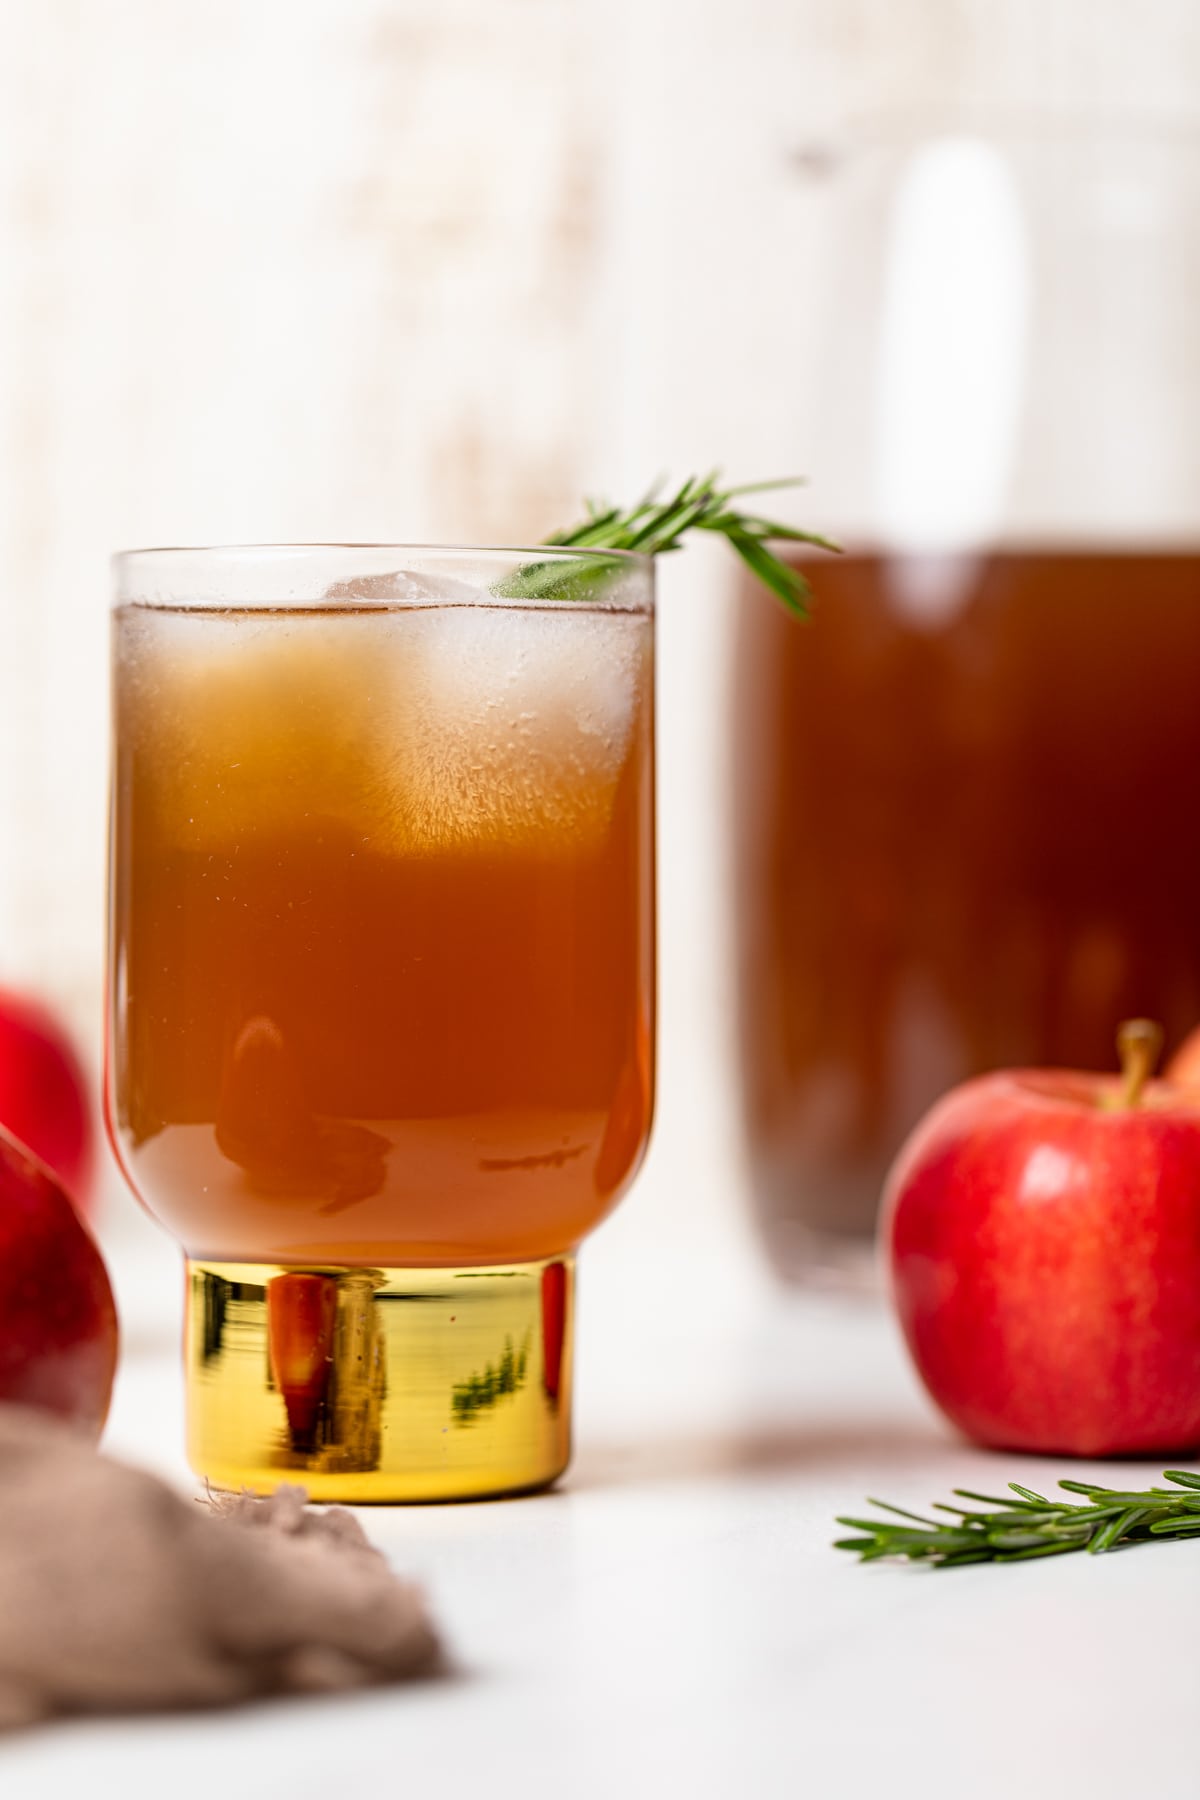 Homemade Slow Cooker Apple Cider with a sprig of rosemary.